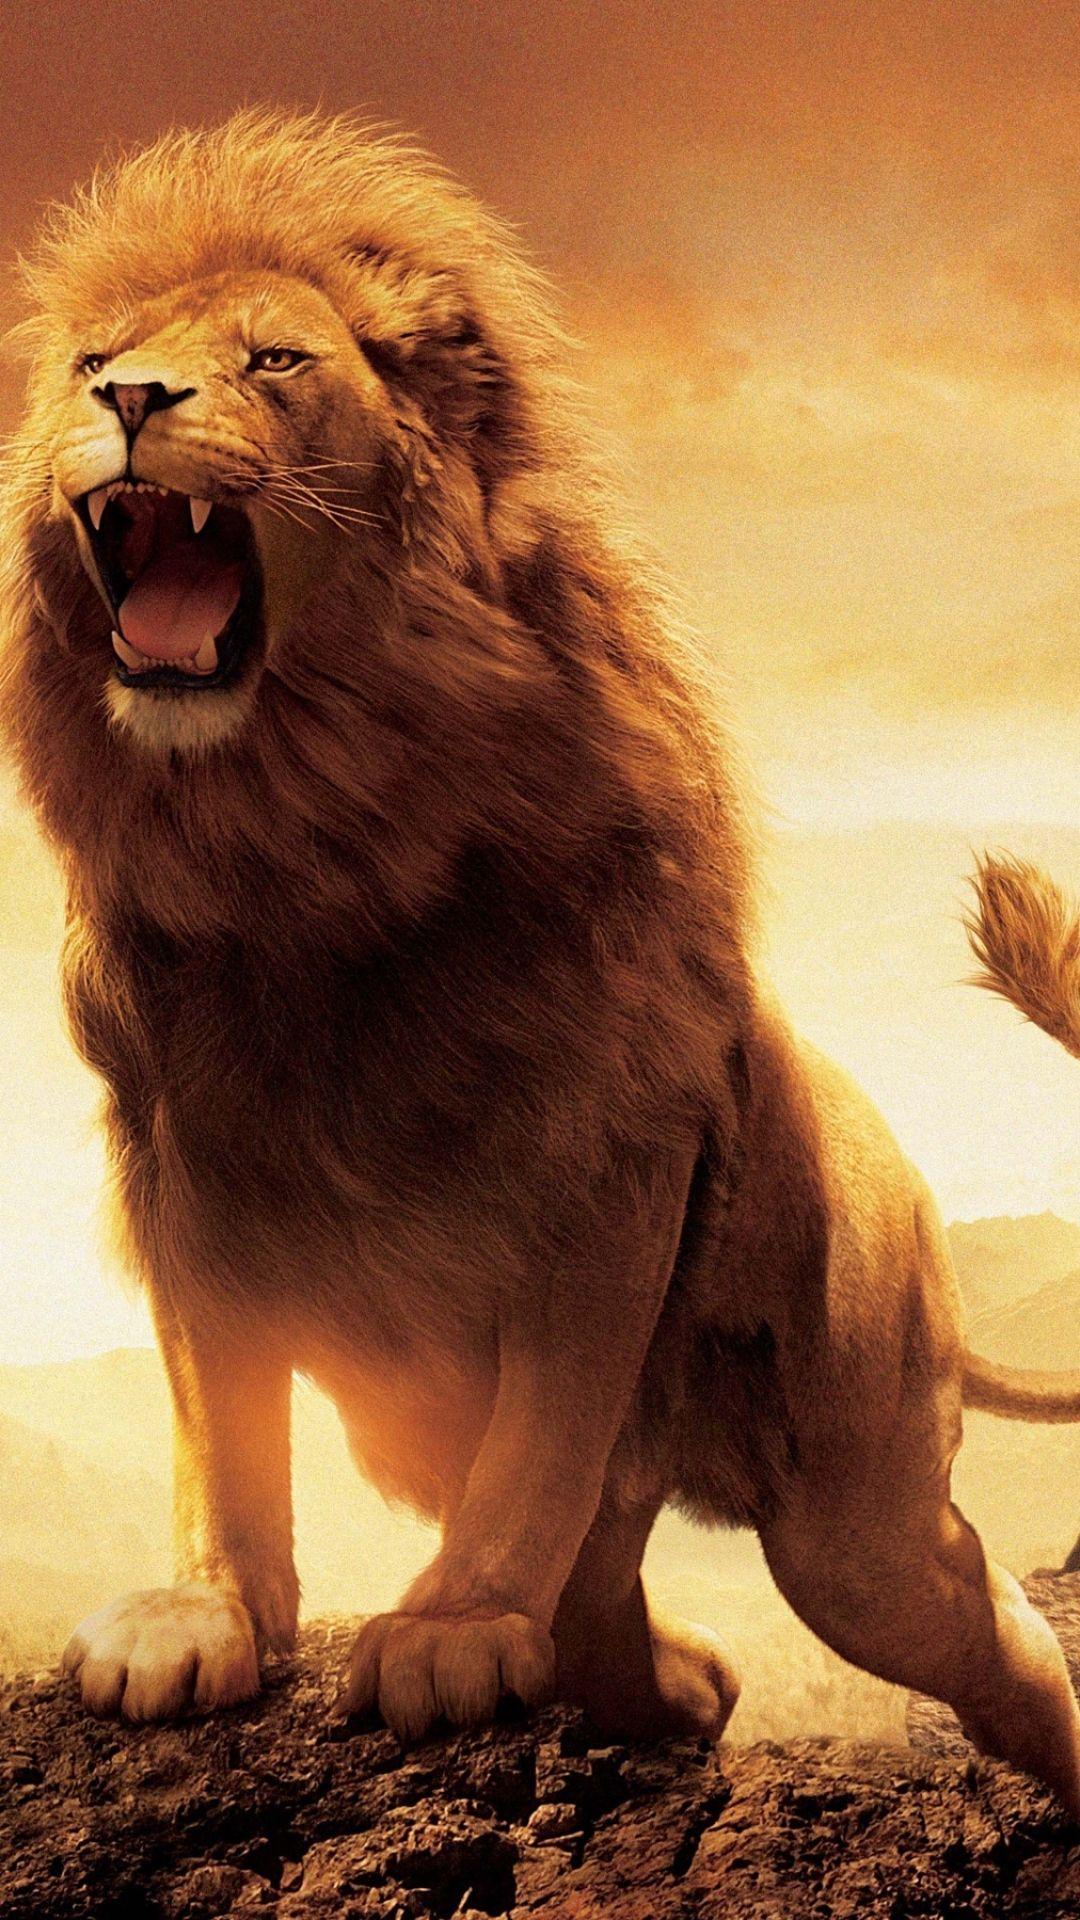 Movie The Chronicles Of Narnia: The Lion, The Witch And